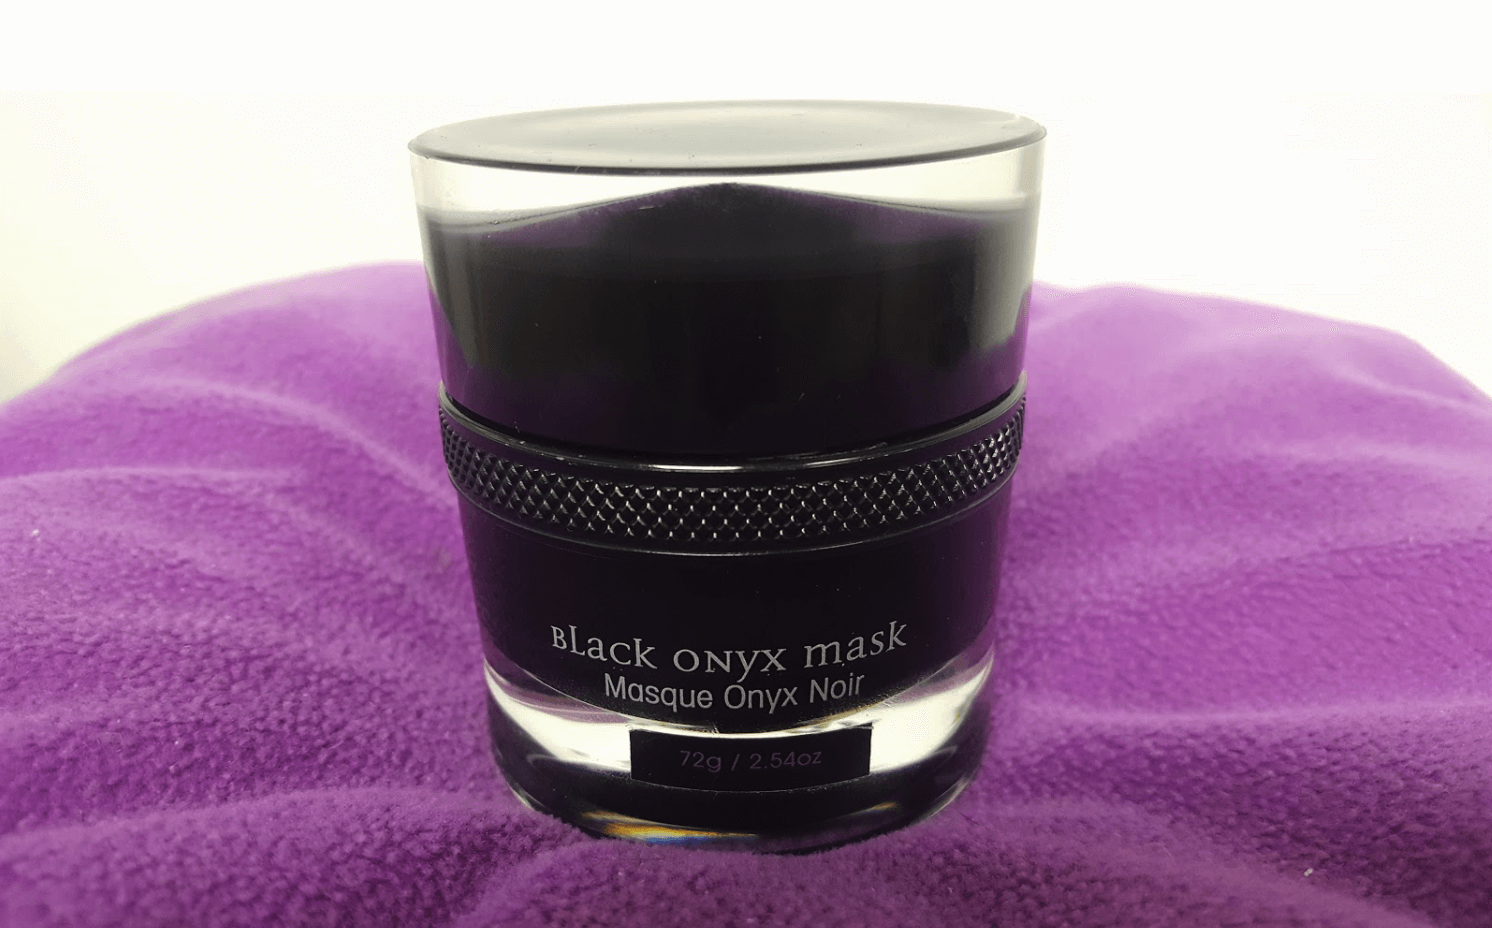 Lionesse Black Onyx Mask review